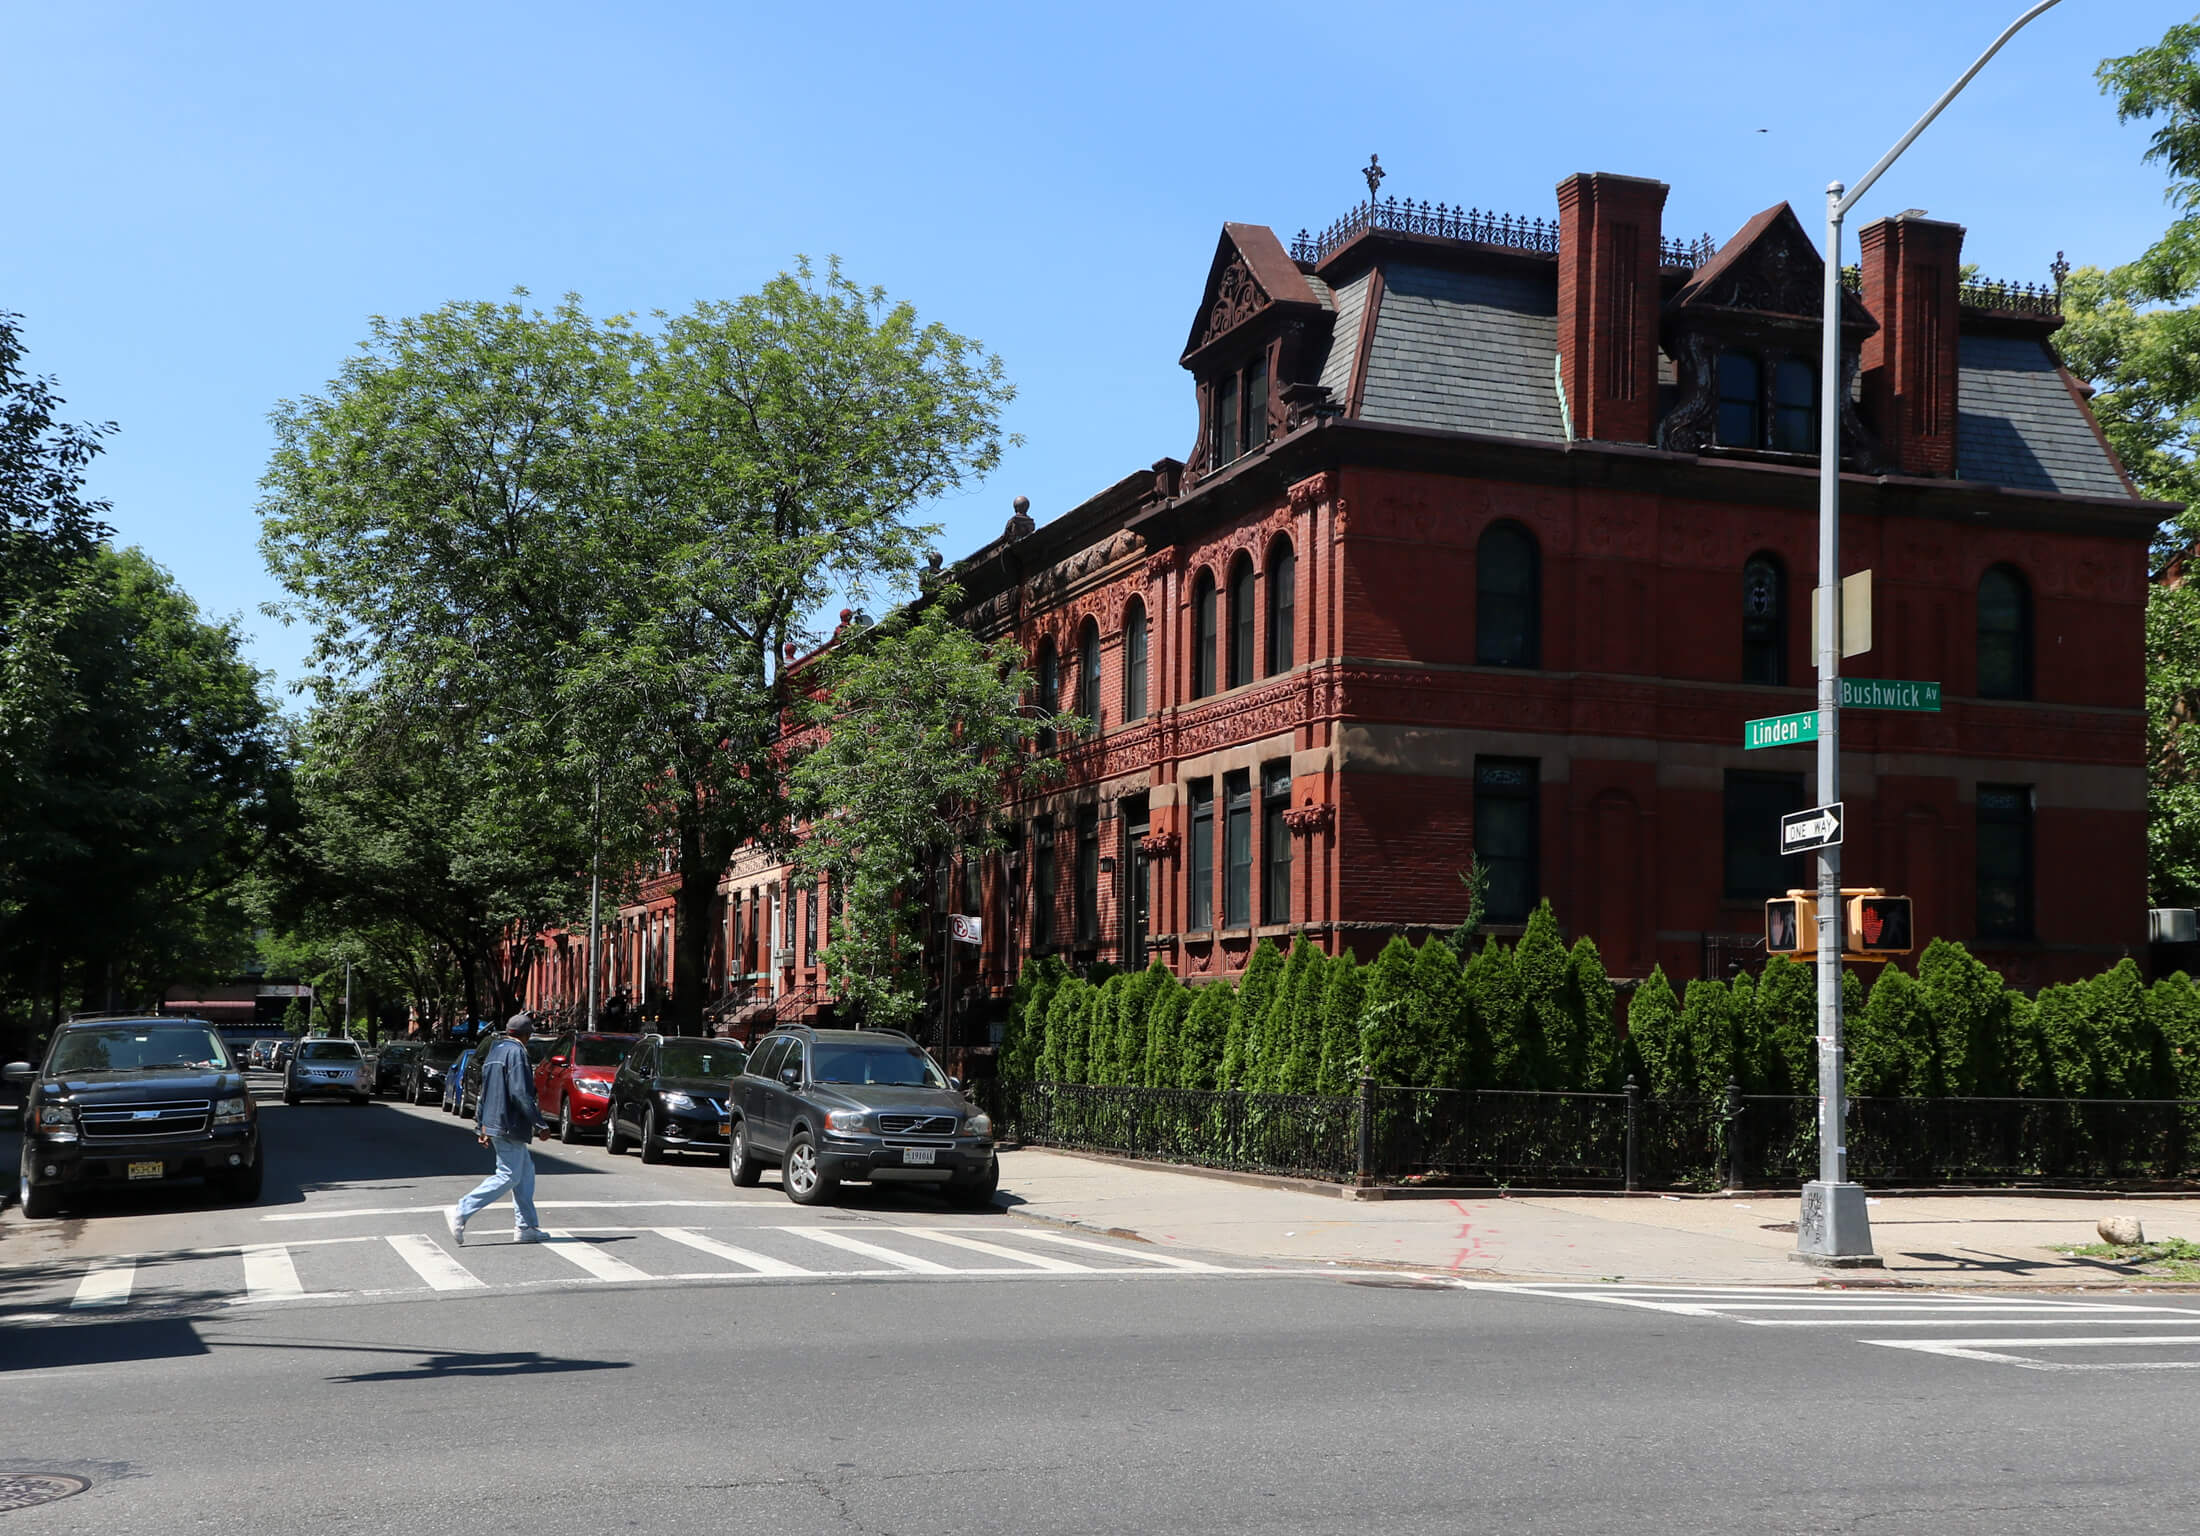 linden street historic district - view of the brick and terra cotta buildings